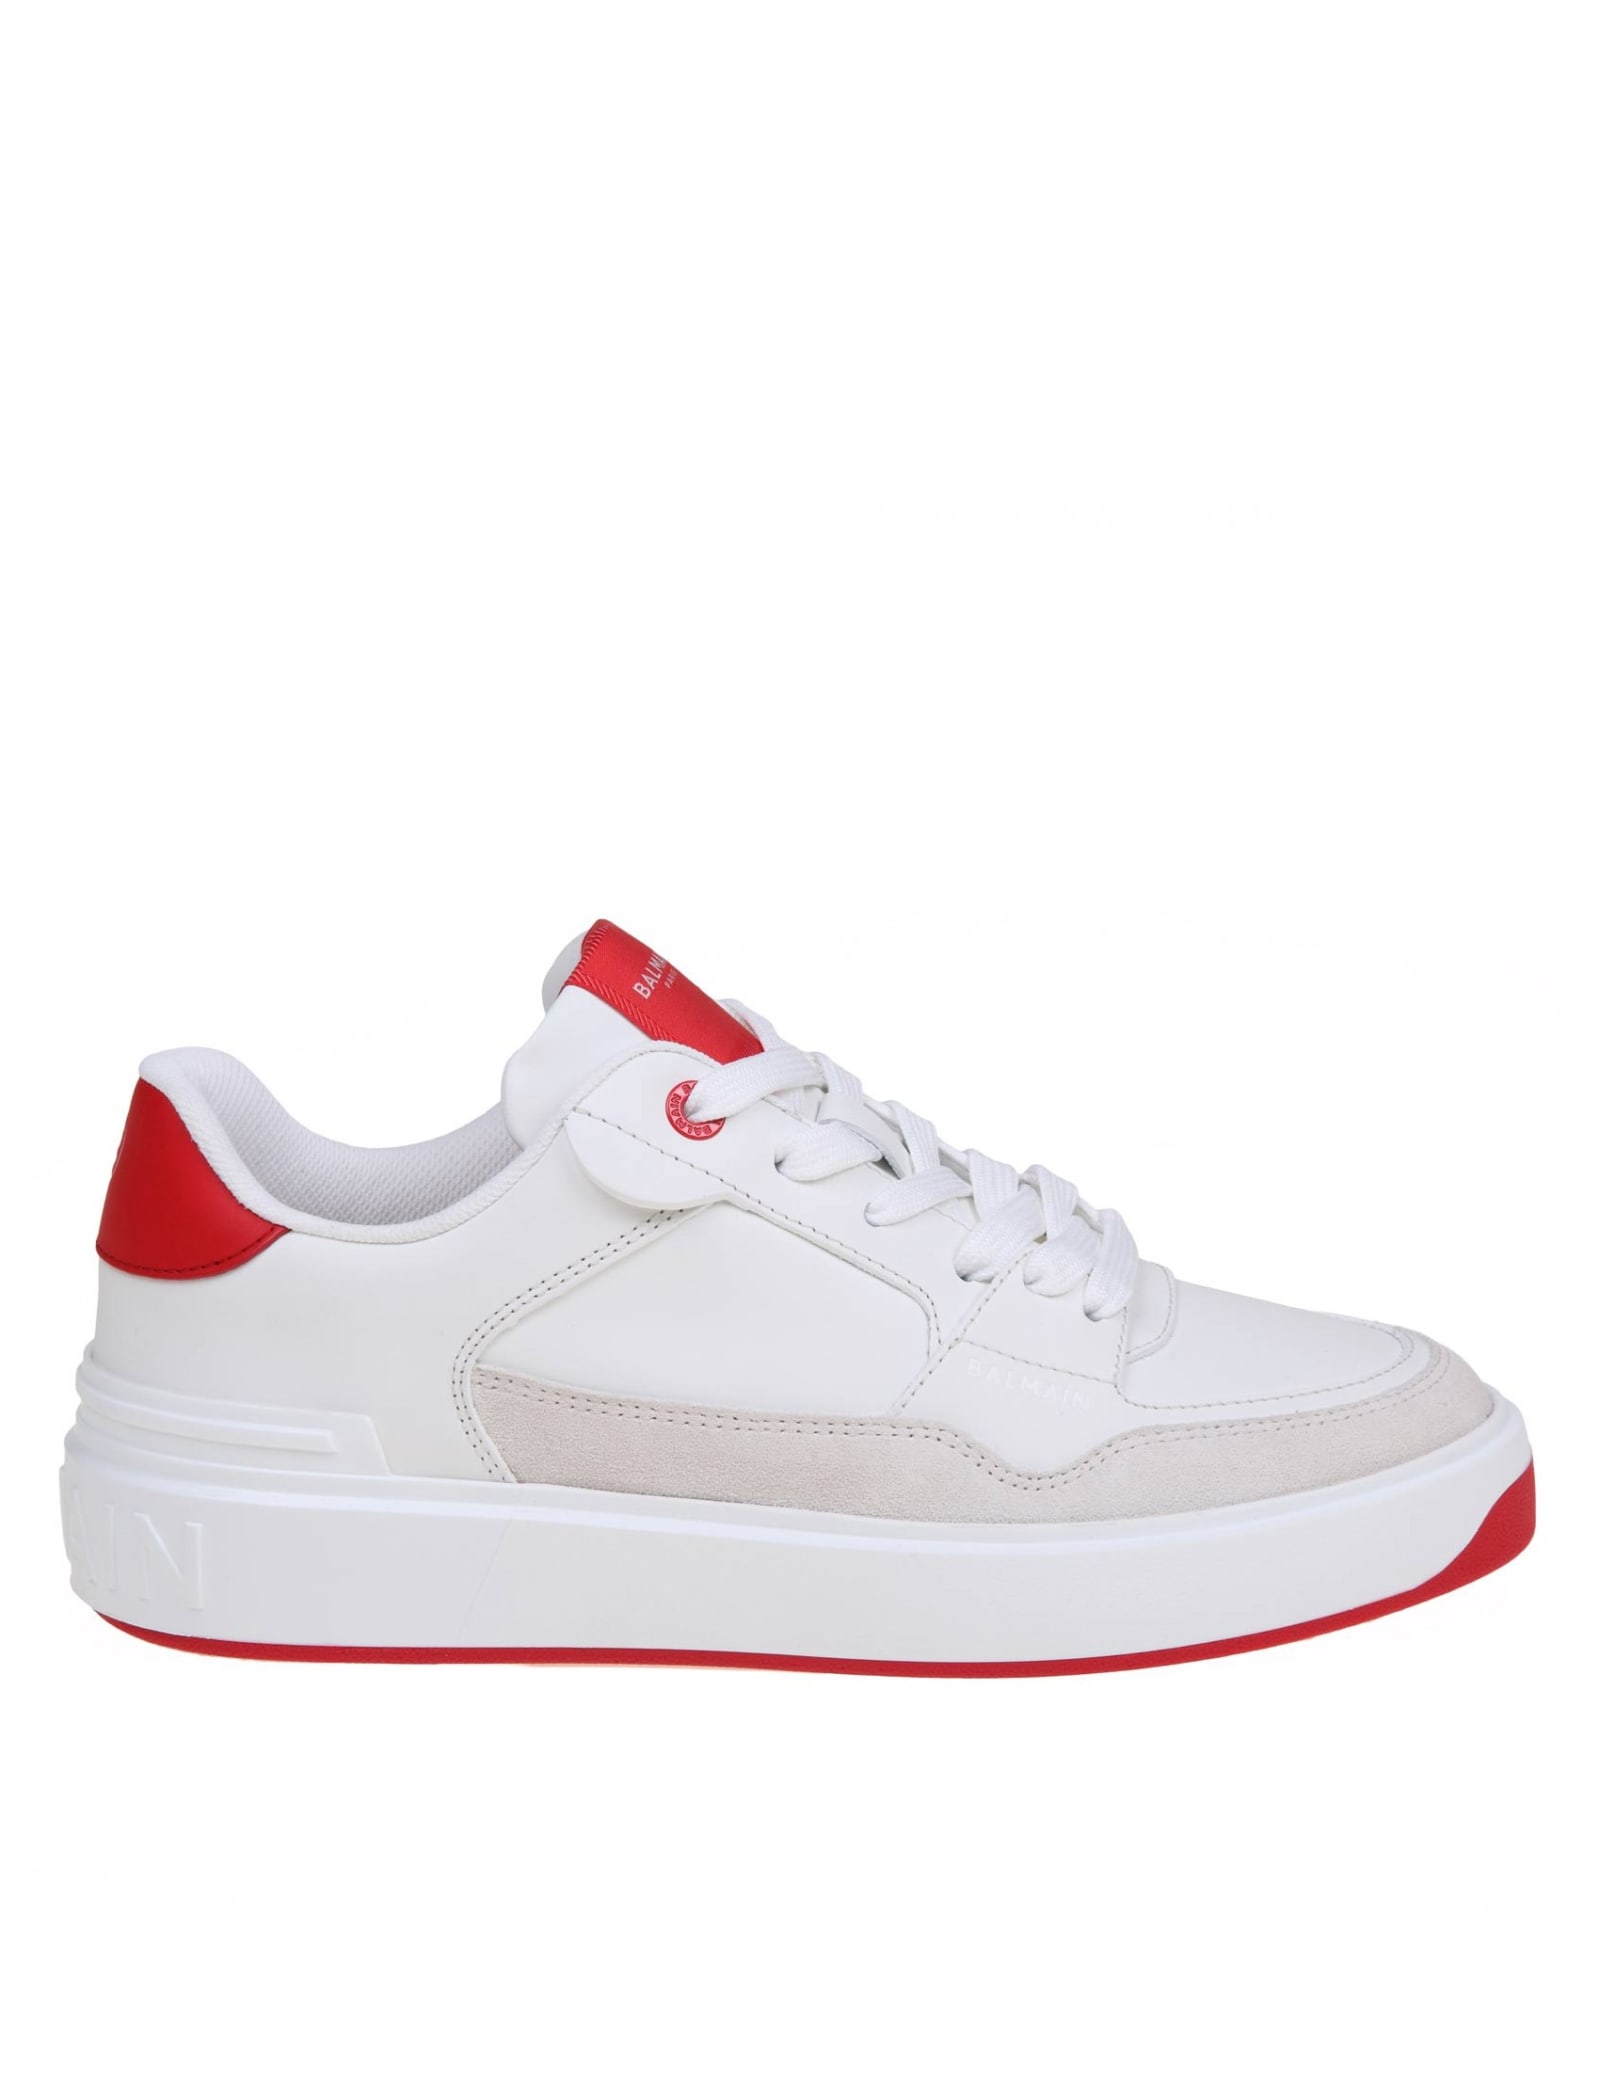 BALMAIN BALMAIN B-COURT FLIP trainers IN WHITE AND RED LEATHER